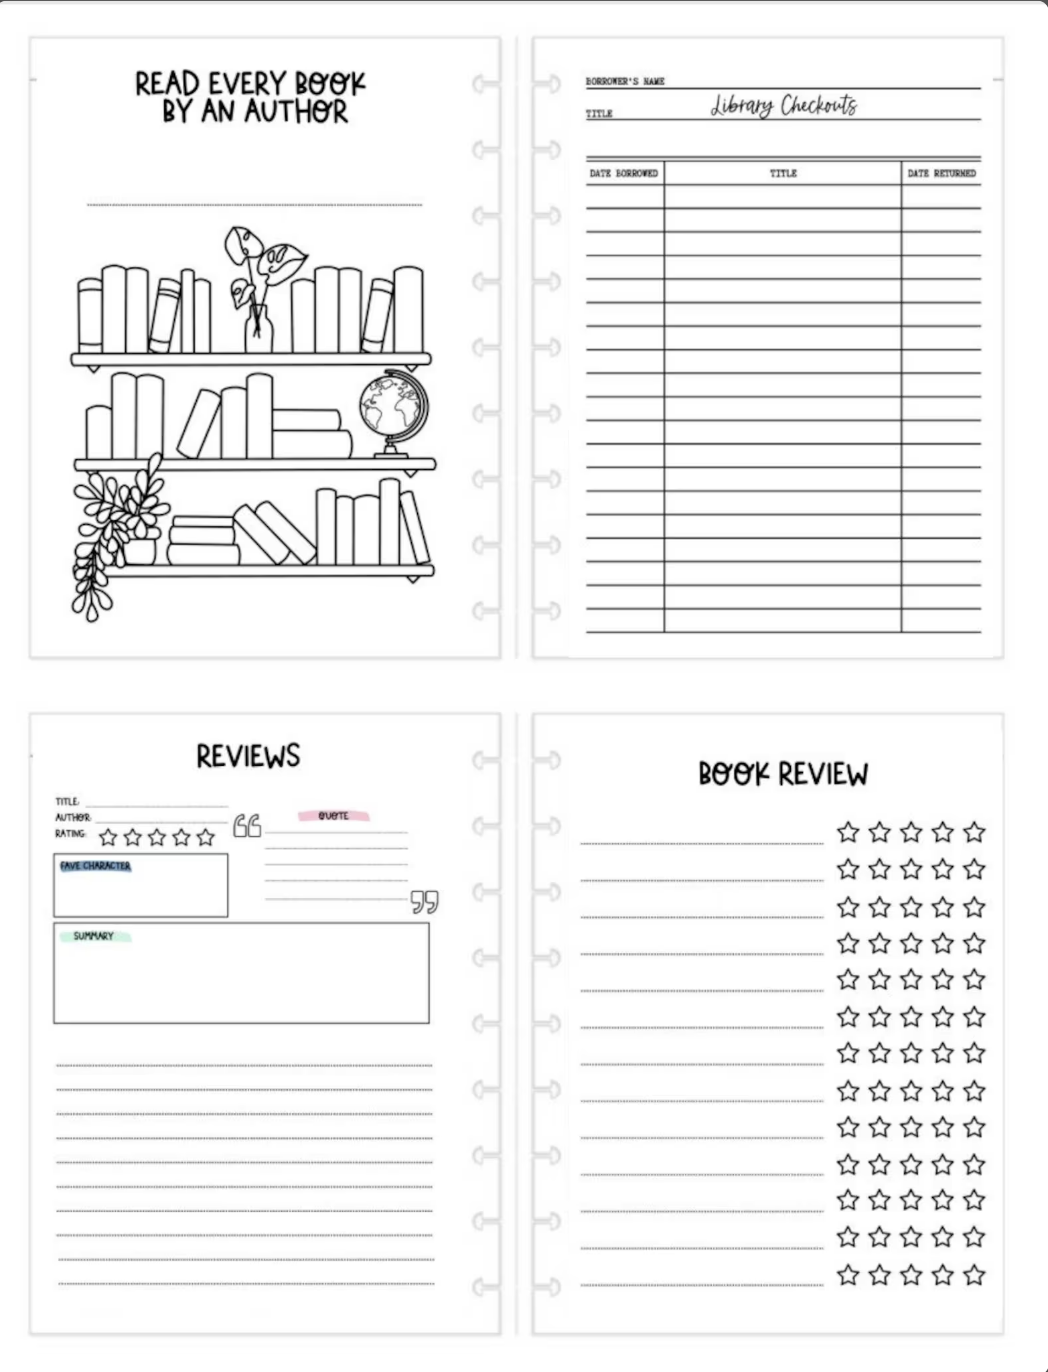 four sample pages of the 2023 book journal which includes an illustration of a book shelf, a library checkout list, and two review pages